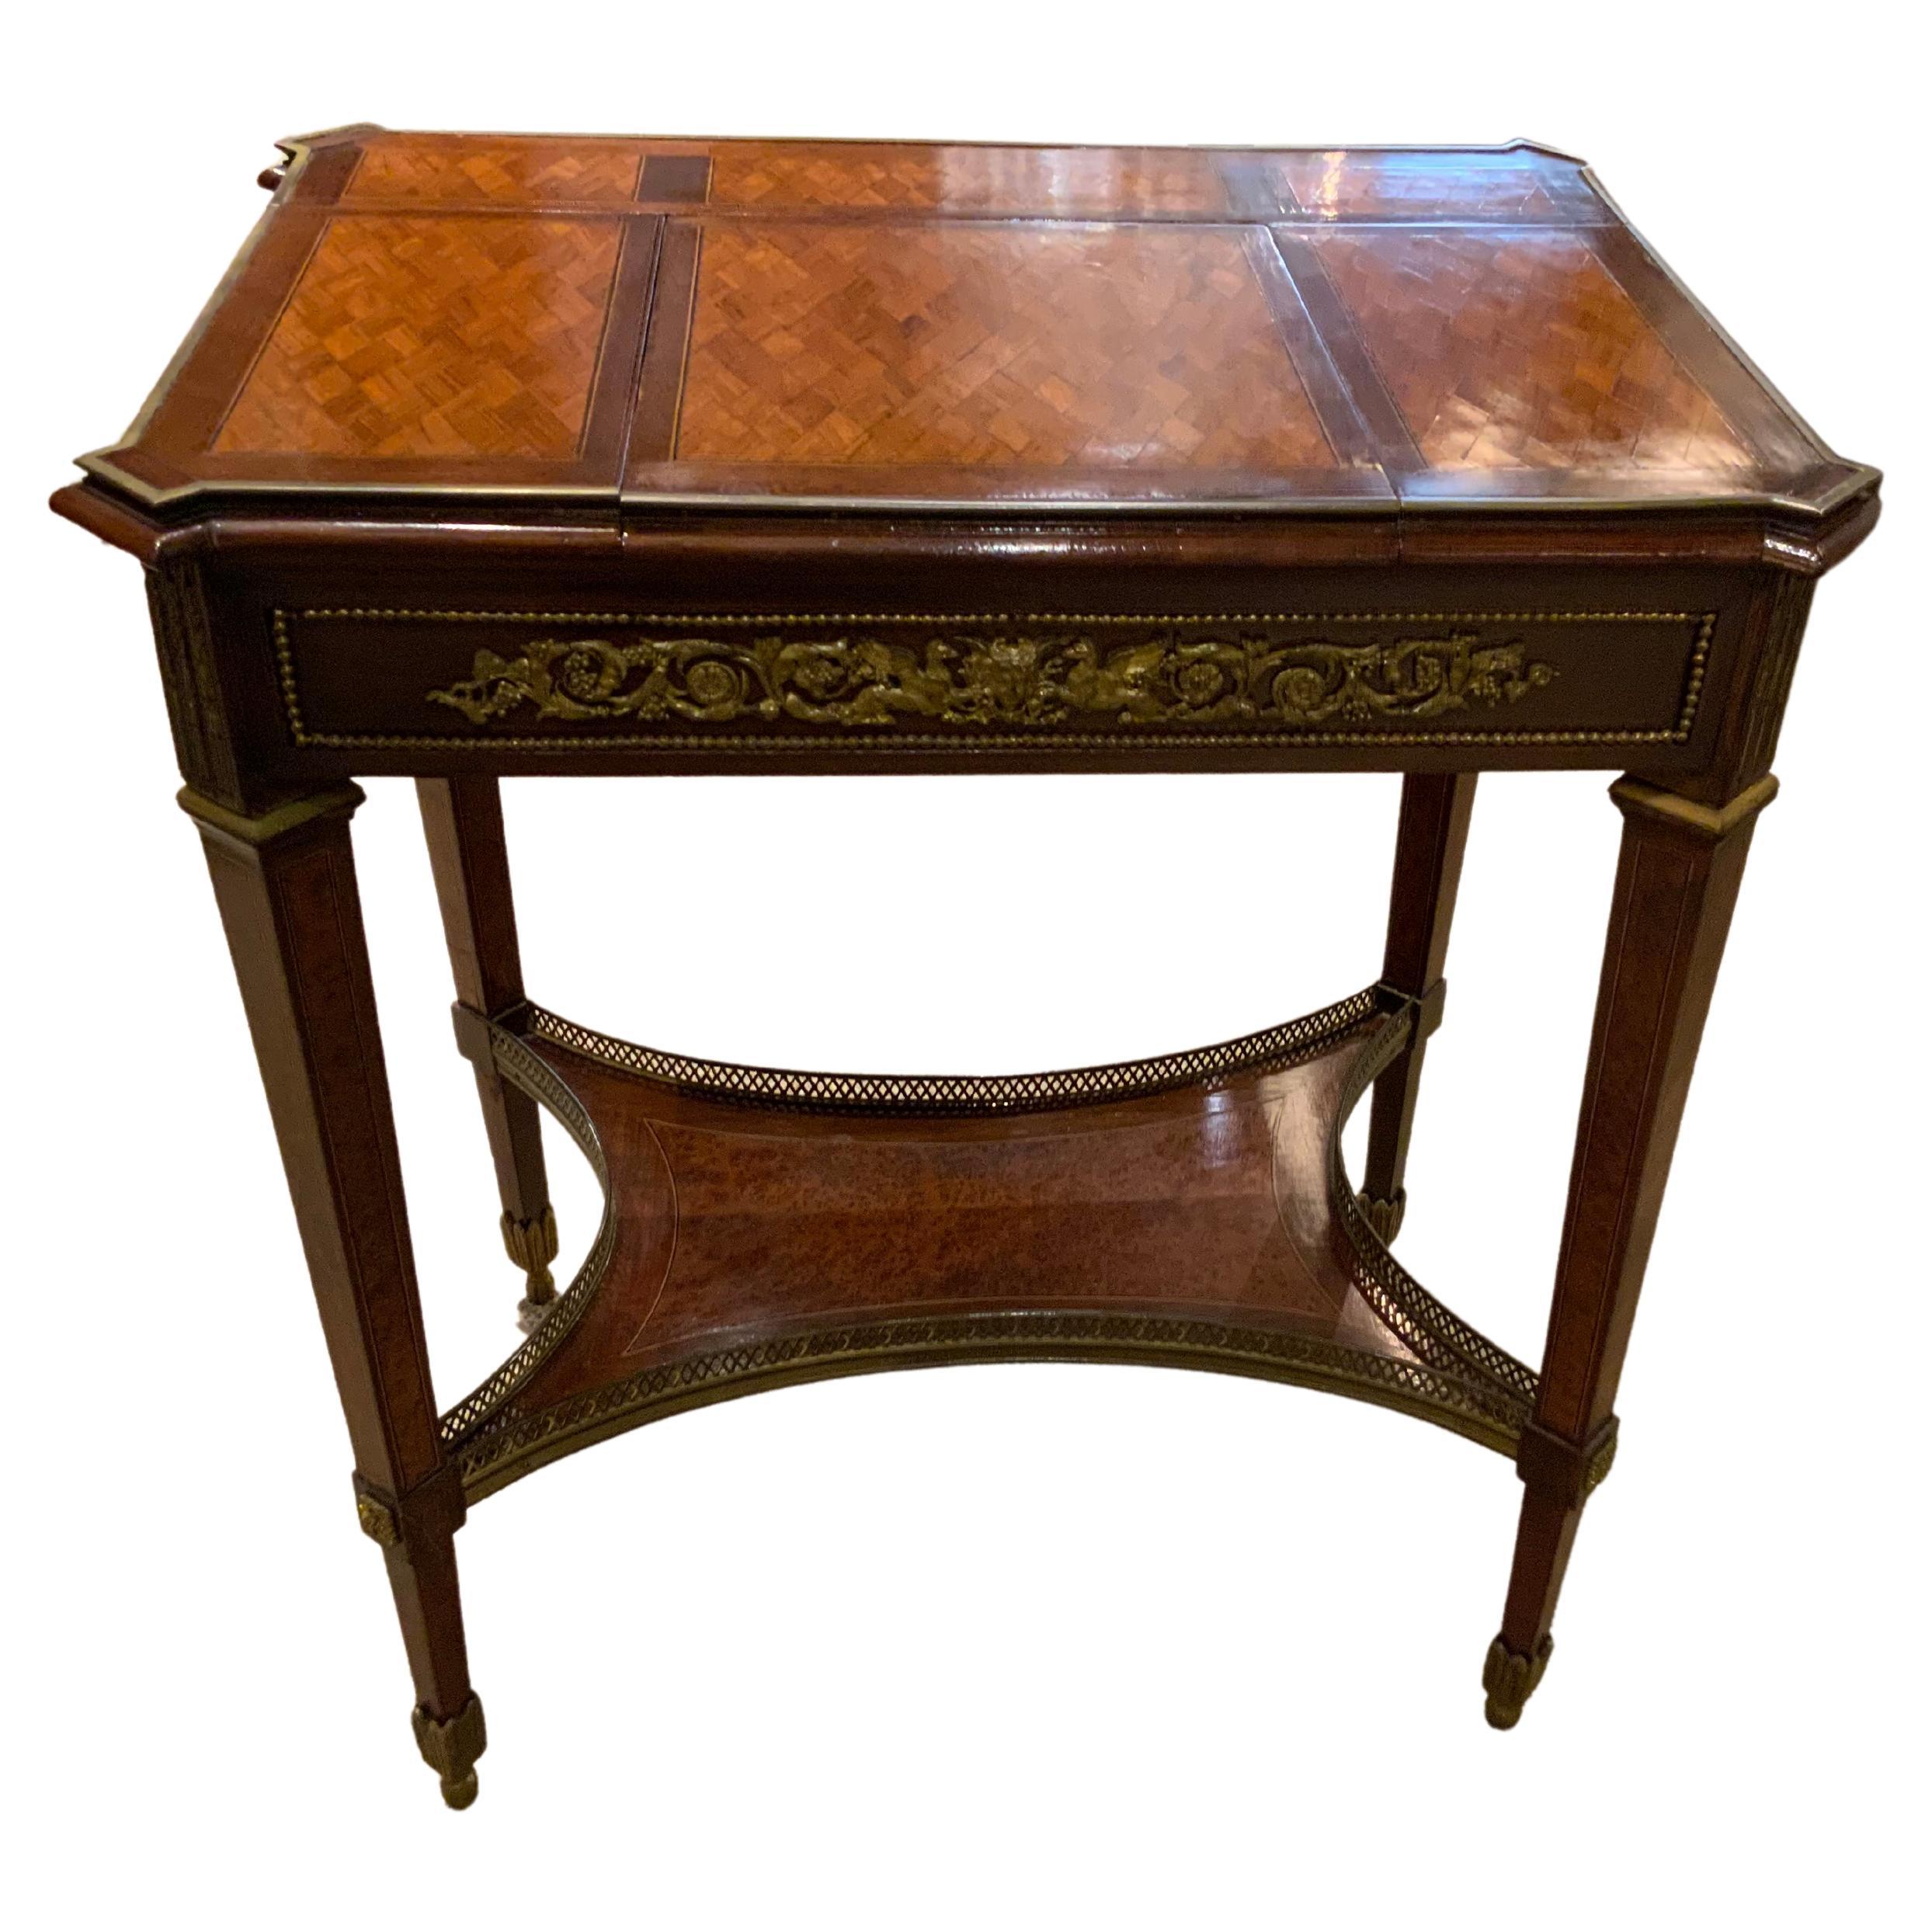 Louis XVI -Style Table/Vanity with Marquetry and Top Opening with Mirror